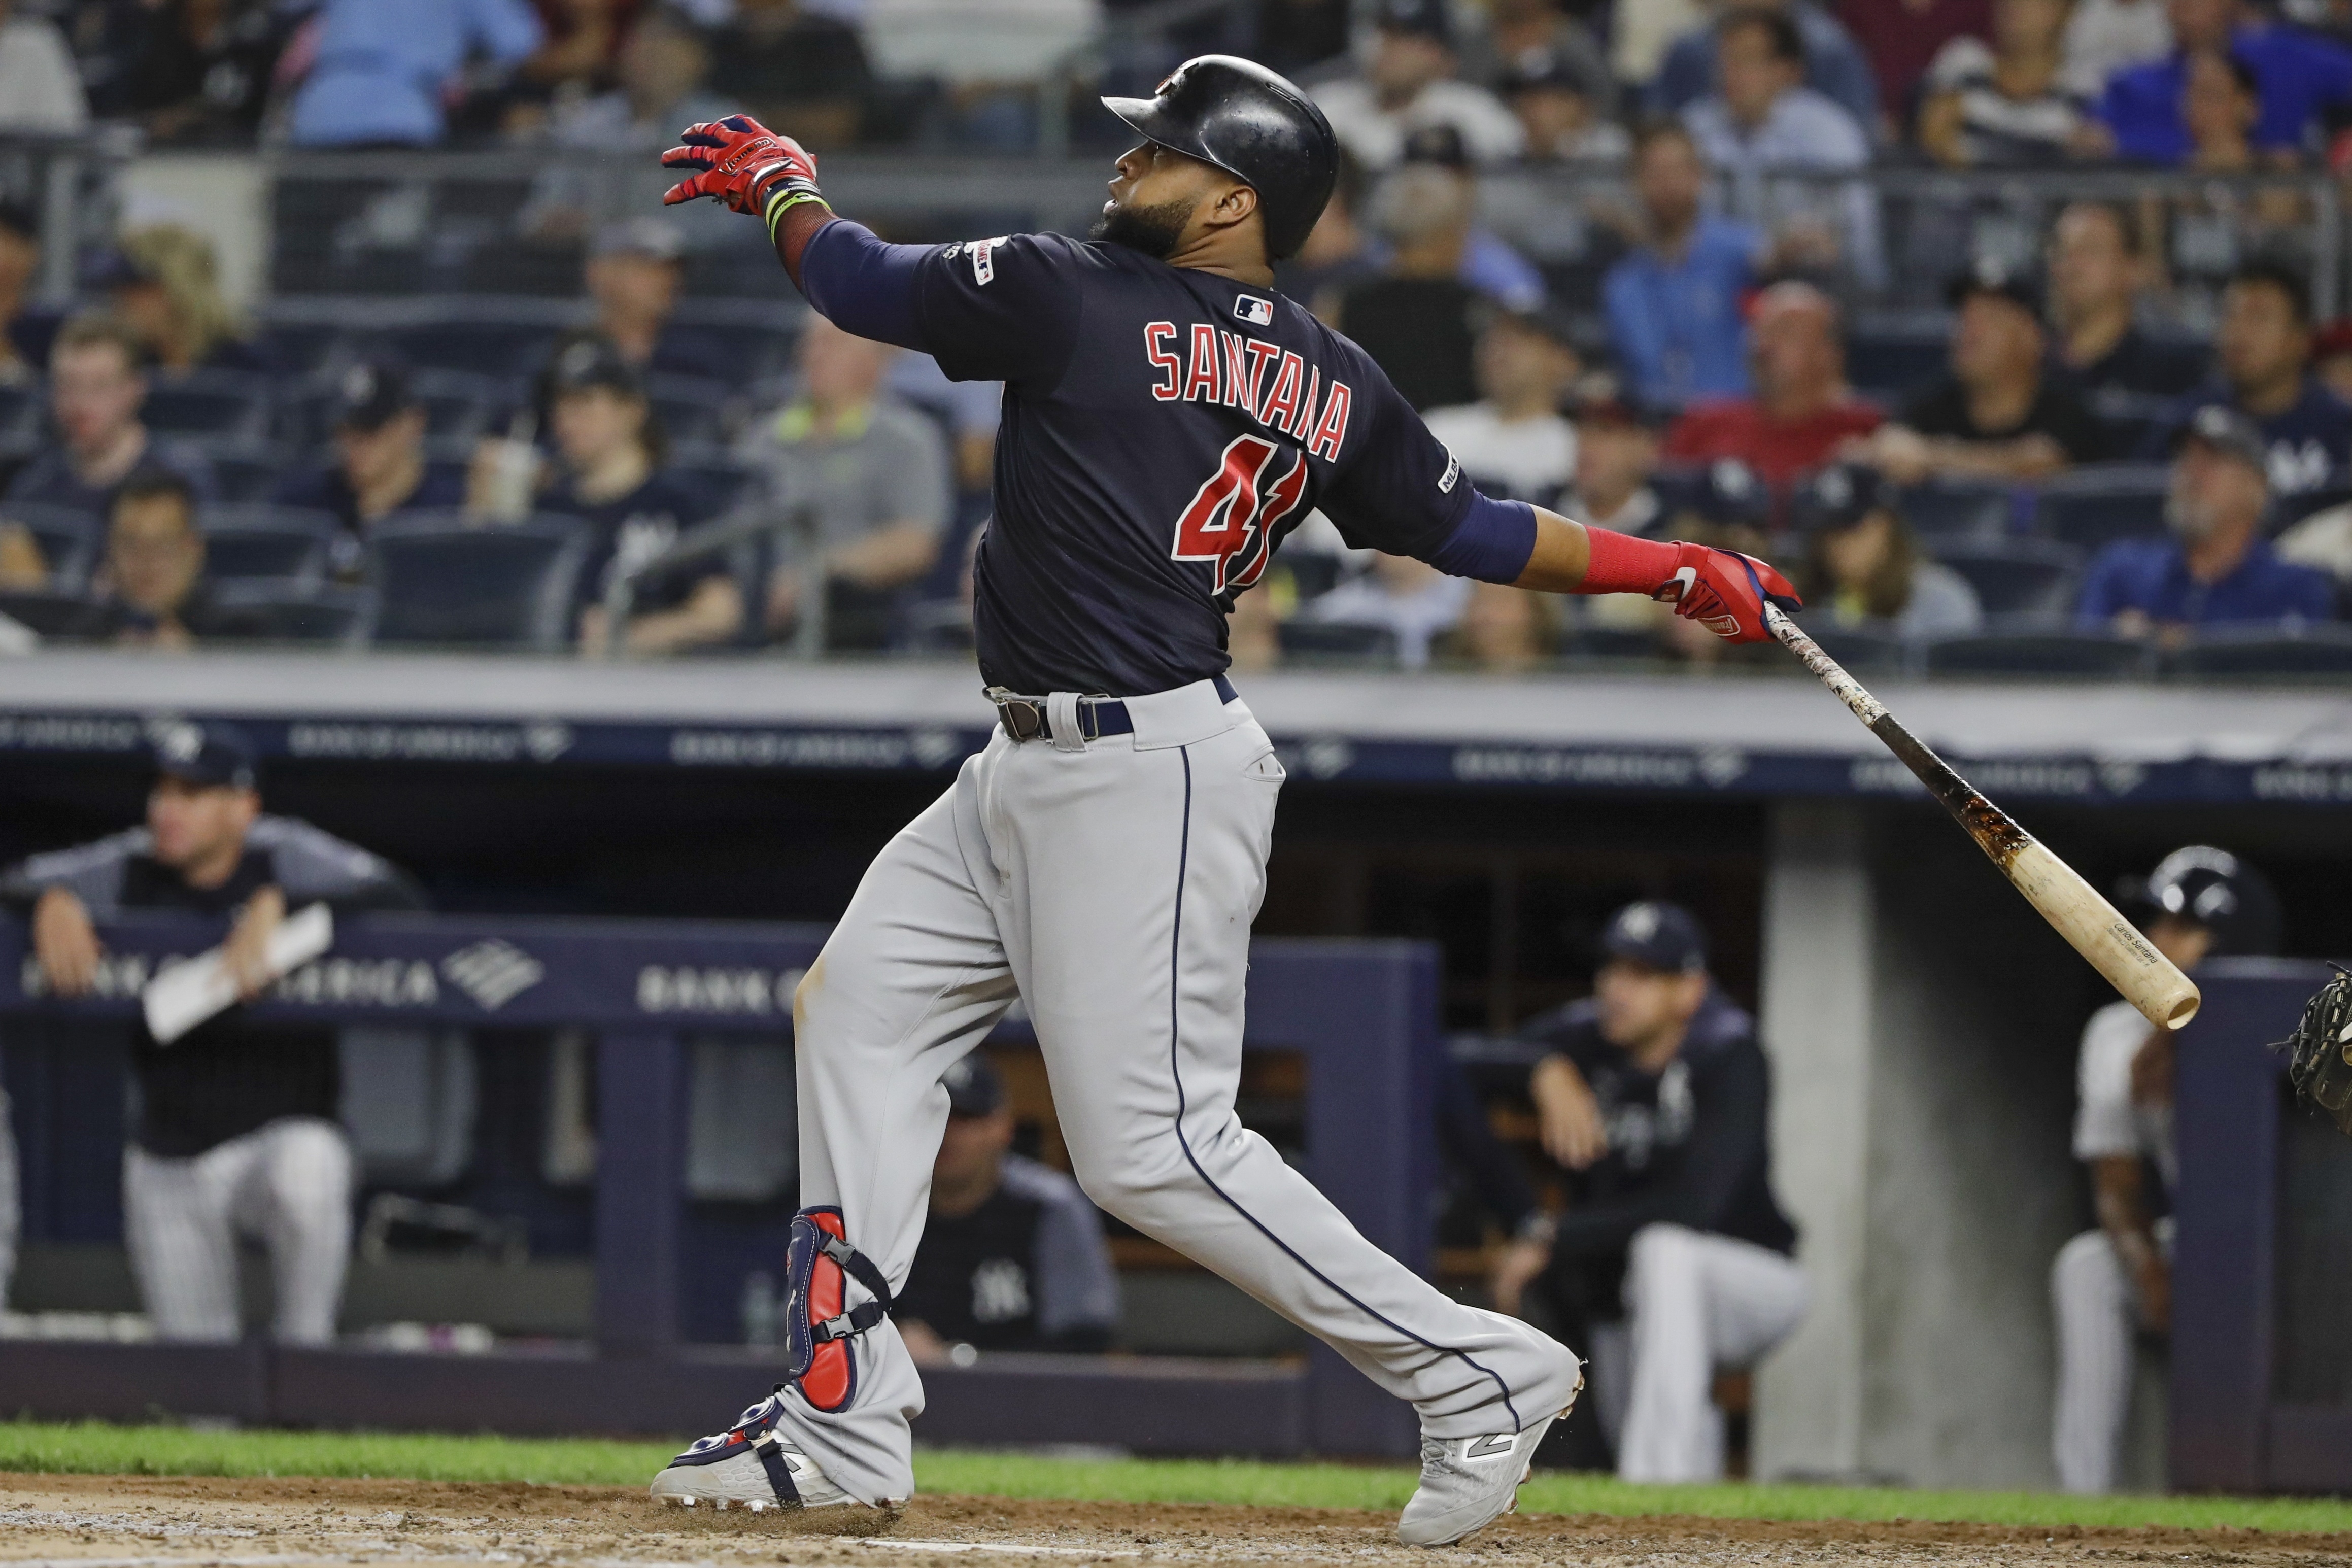 Ramírez, Santana power Indians to 7 HRs in 19-5 rout vs NYY